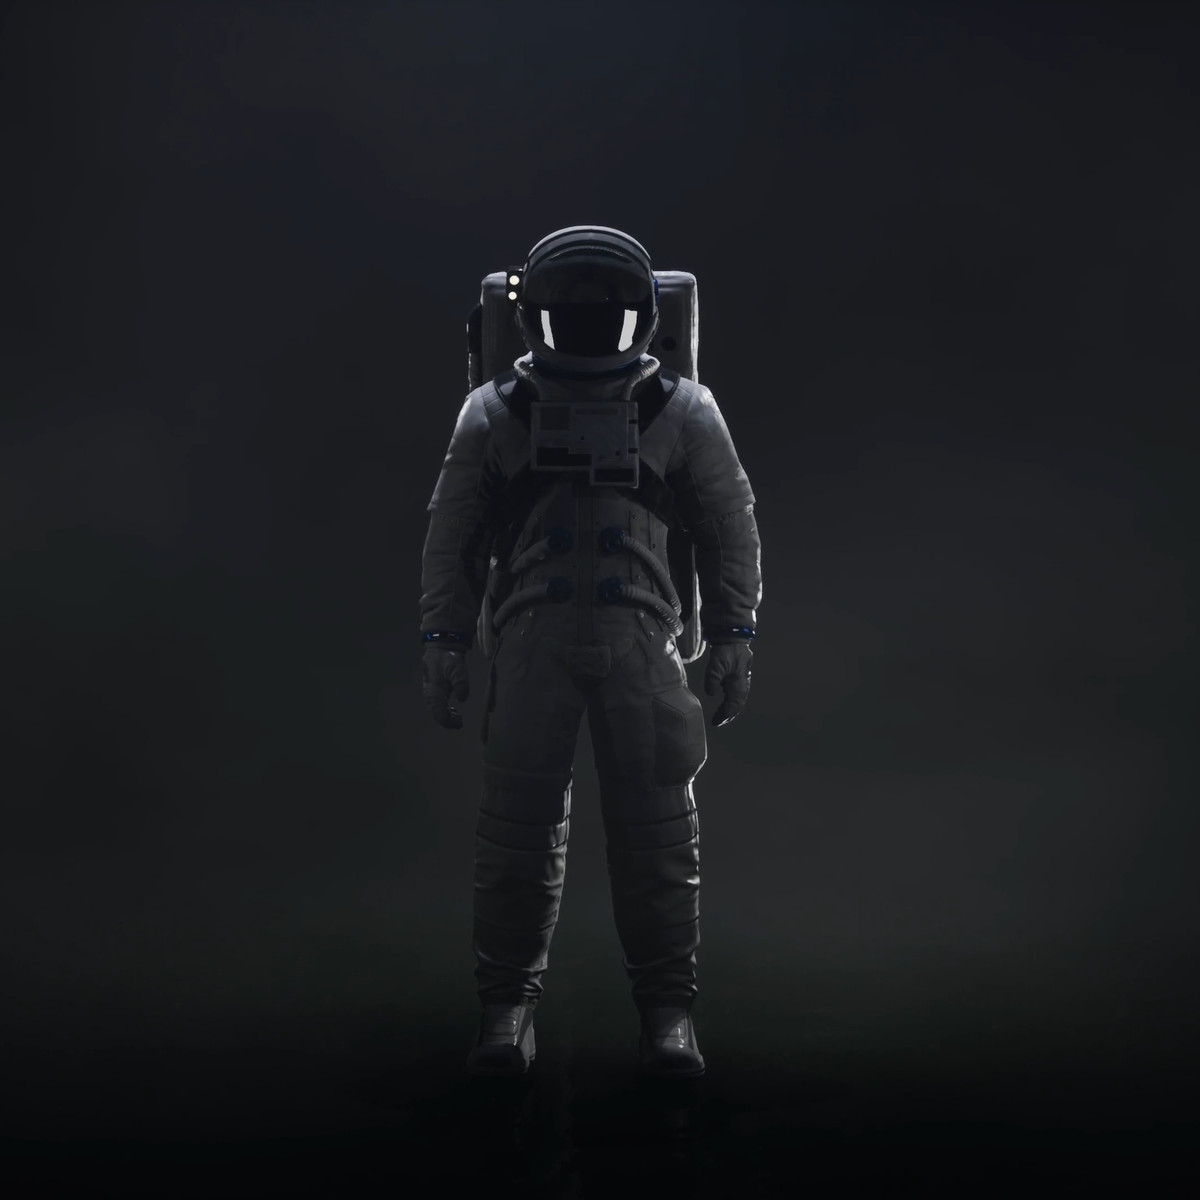 The astronaut in Returnal